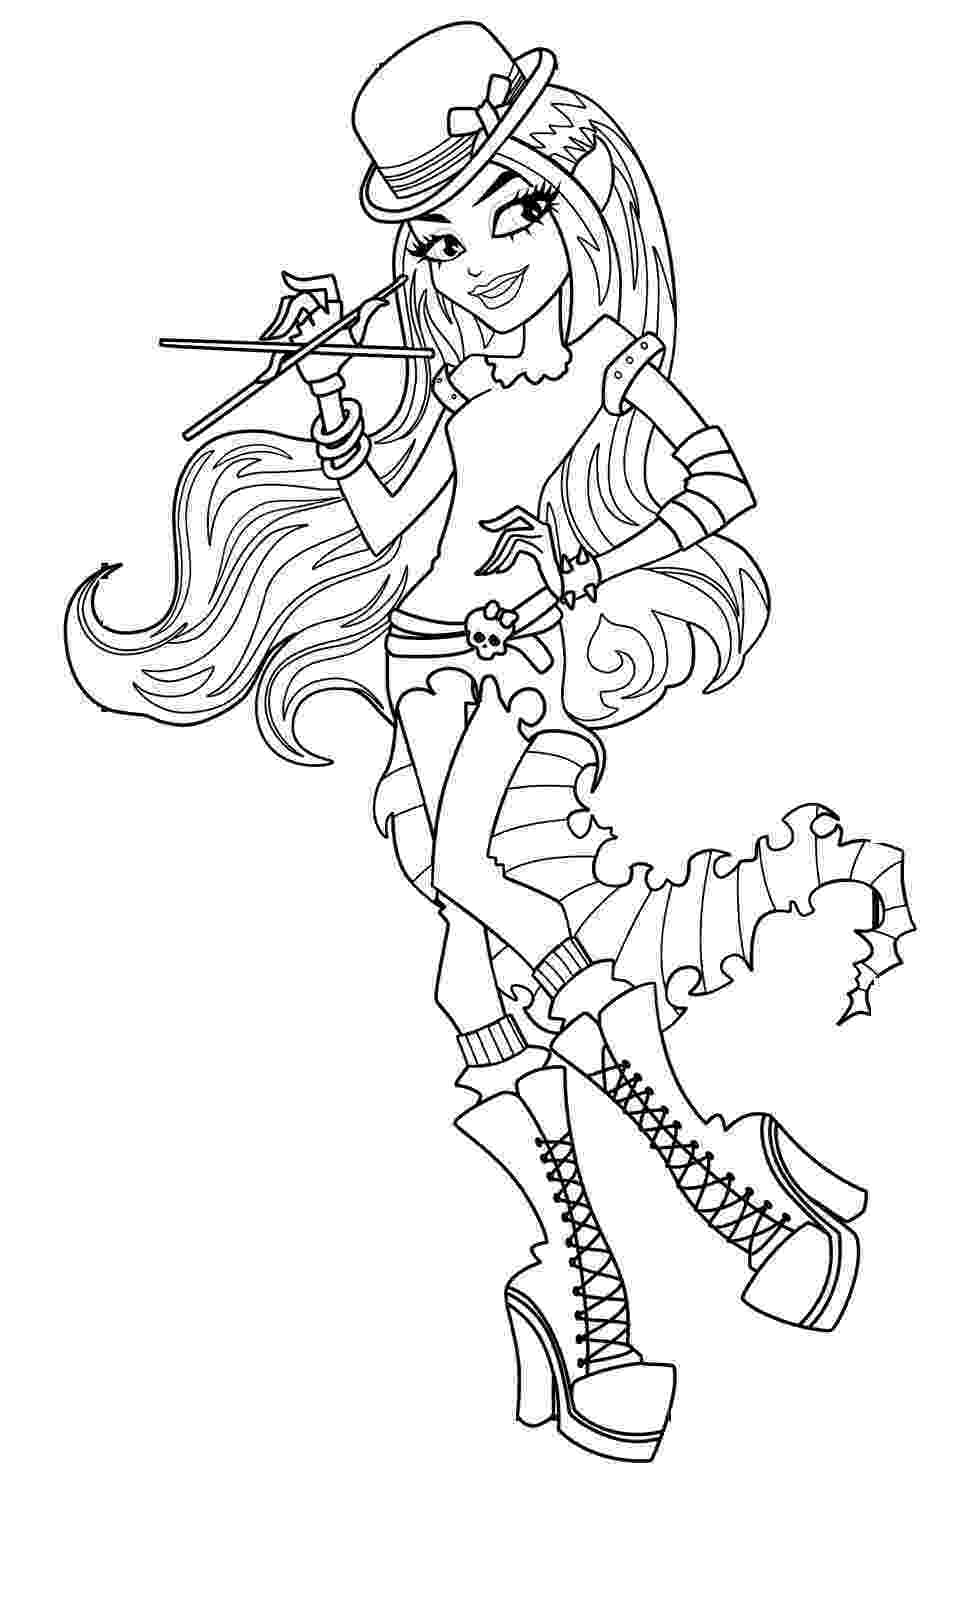 coloring pages online monster high clawdeen wolf shows something coloring pages monster monster coloring online pages high 